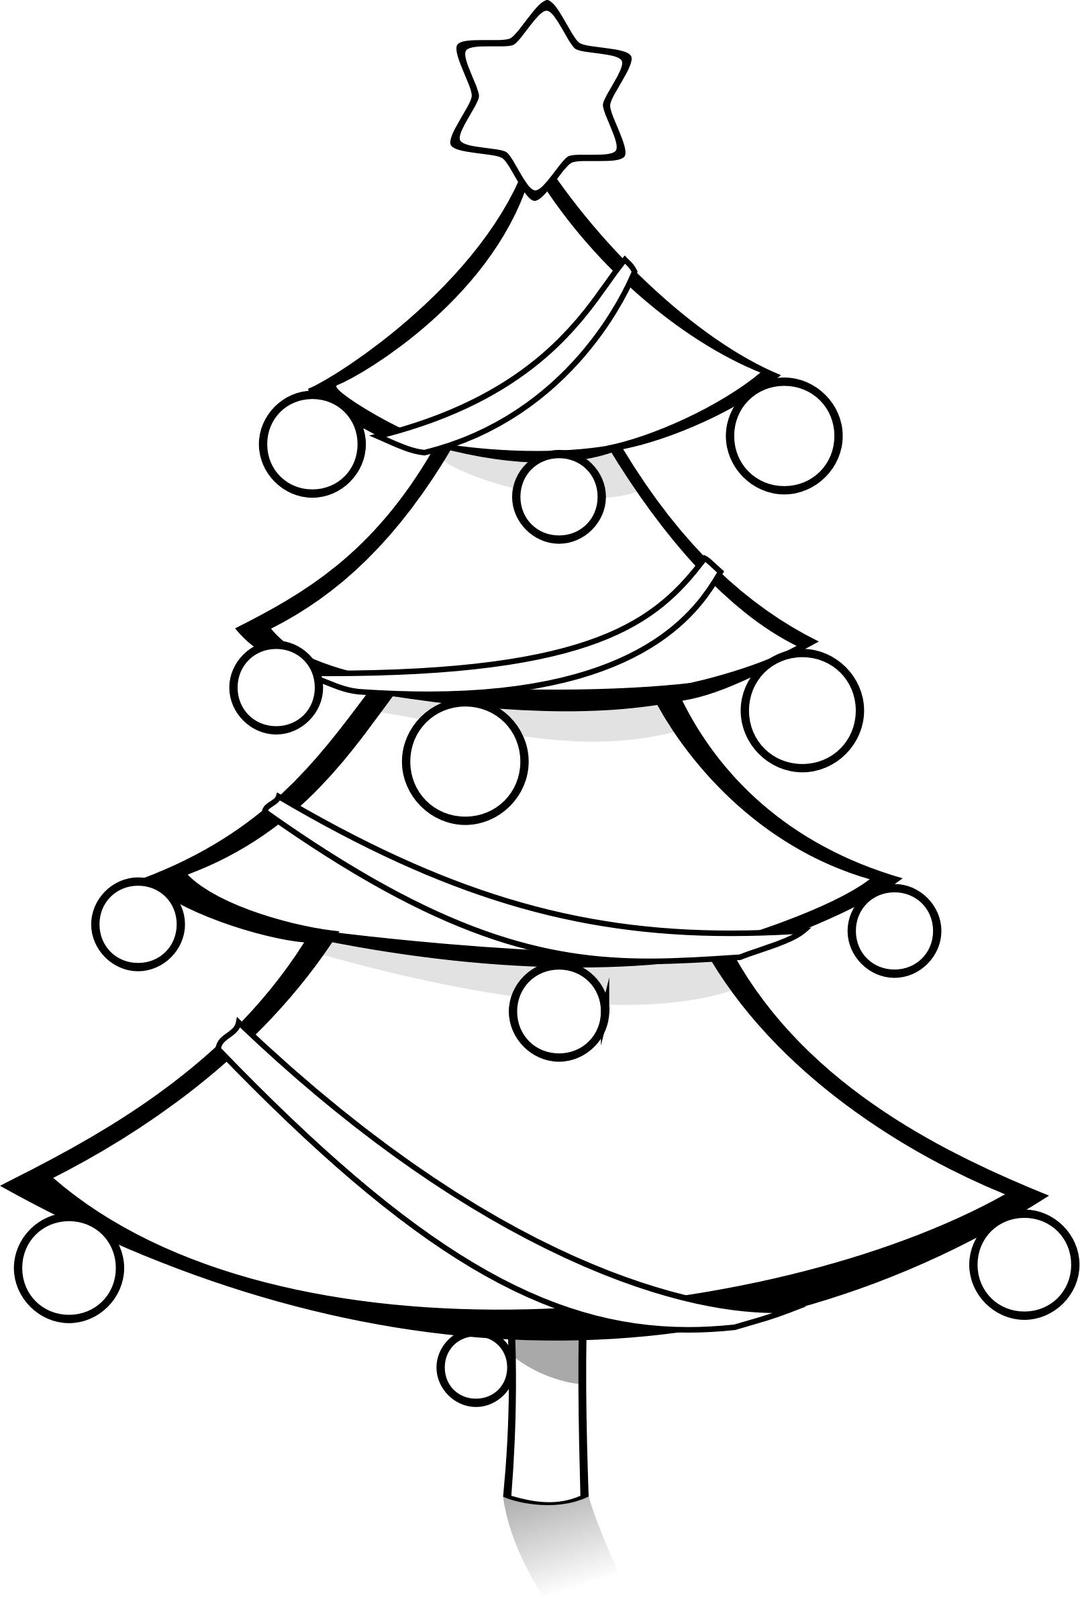 Christmas Tree Coloring Page png transparent